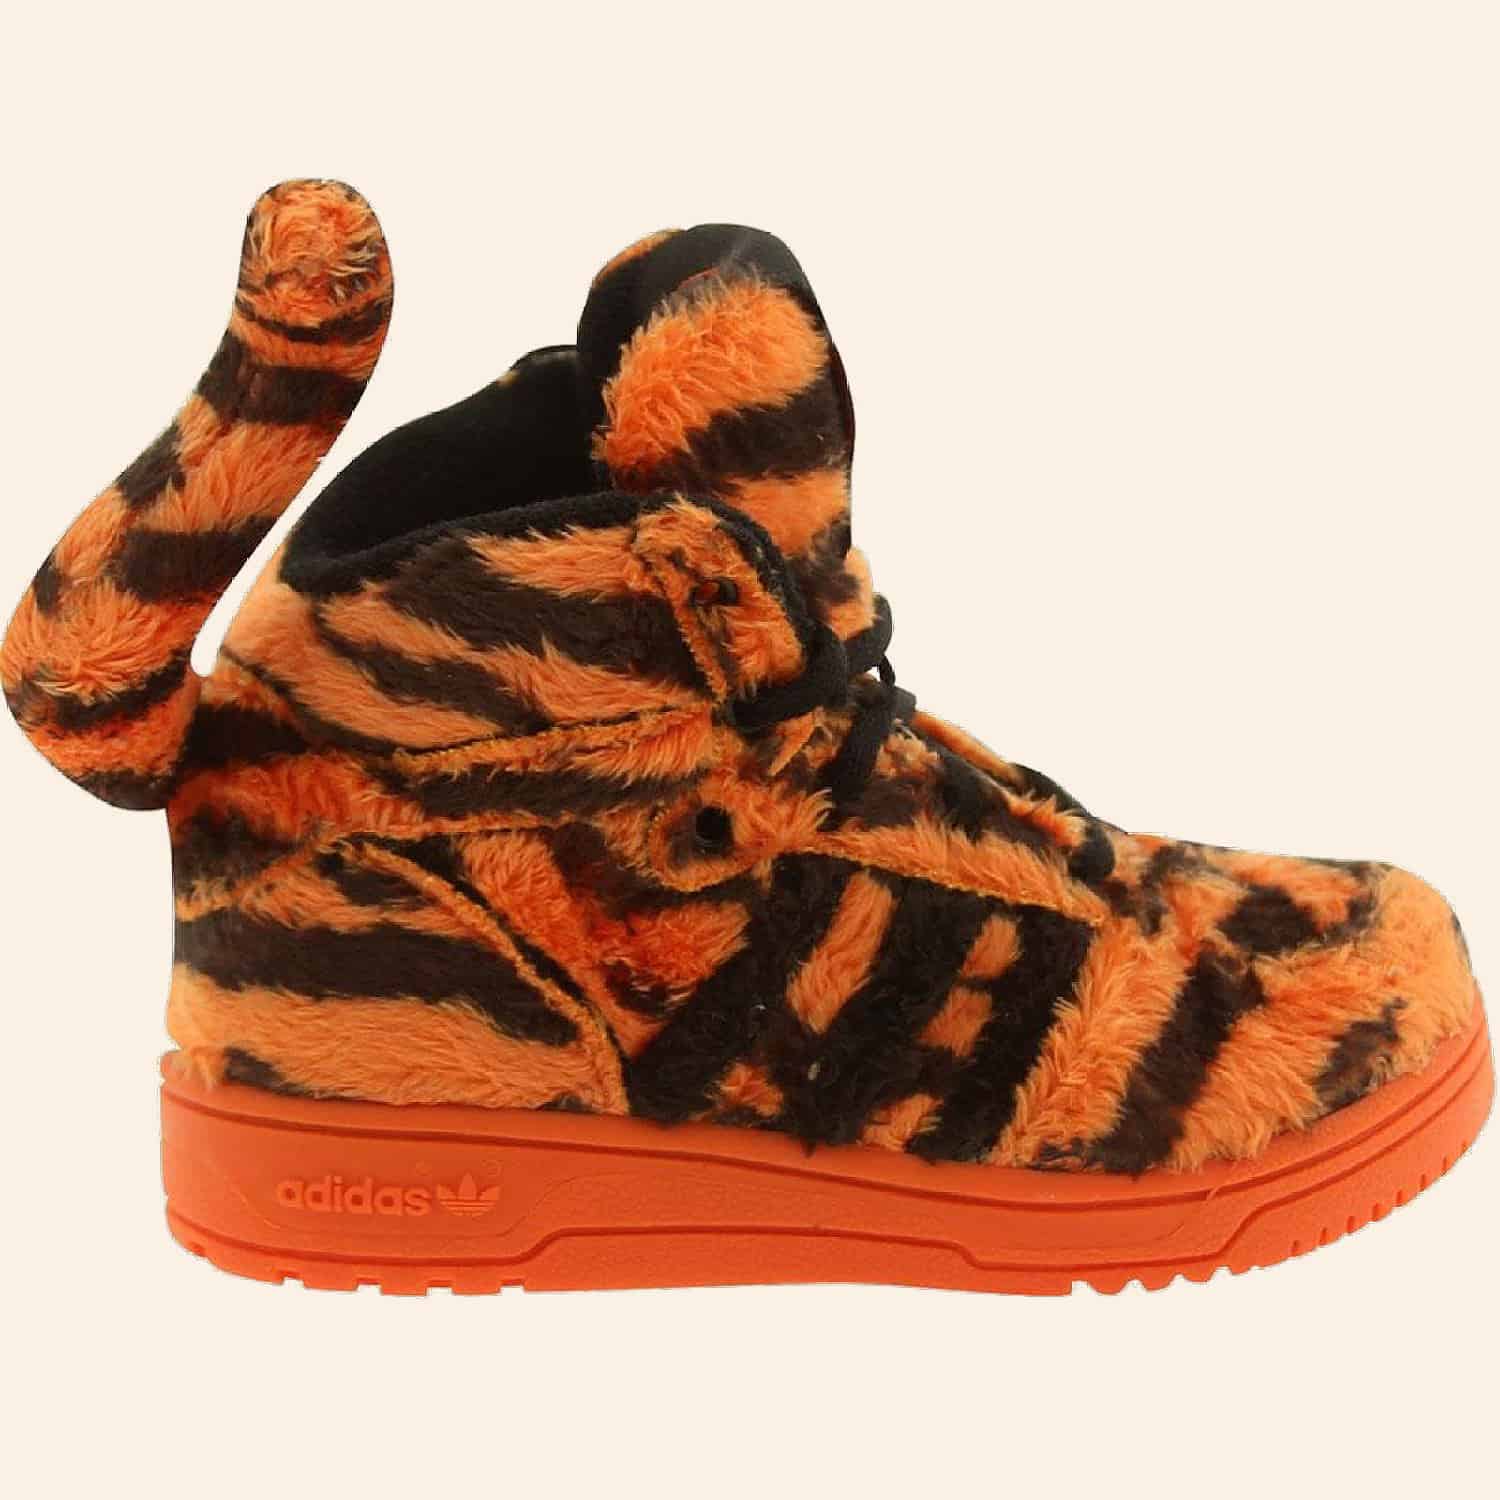 Adidas Jeremy Scott Tiger Toddler Sneakers to Buy